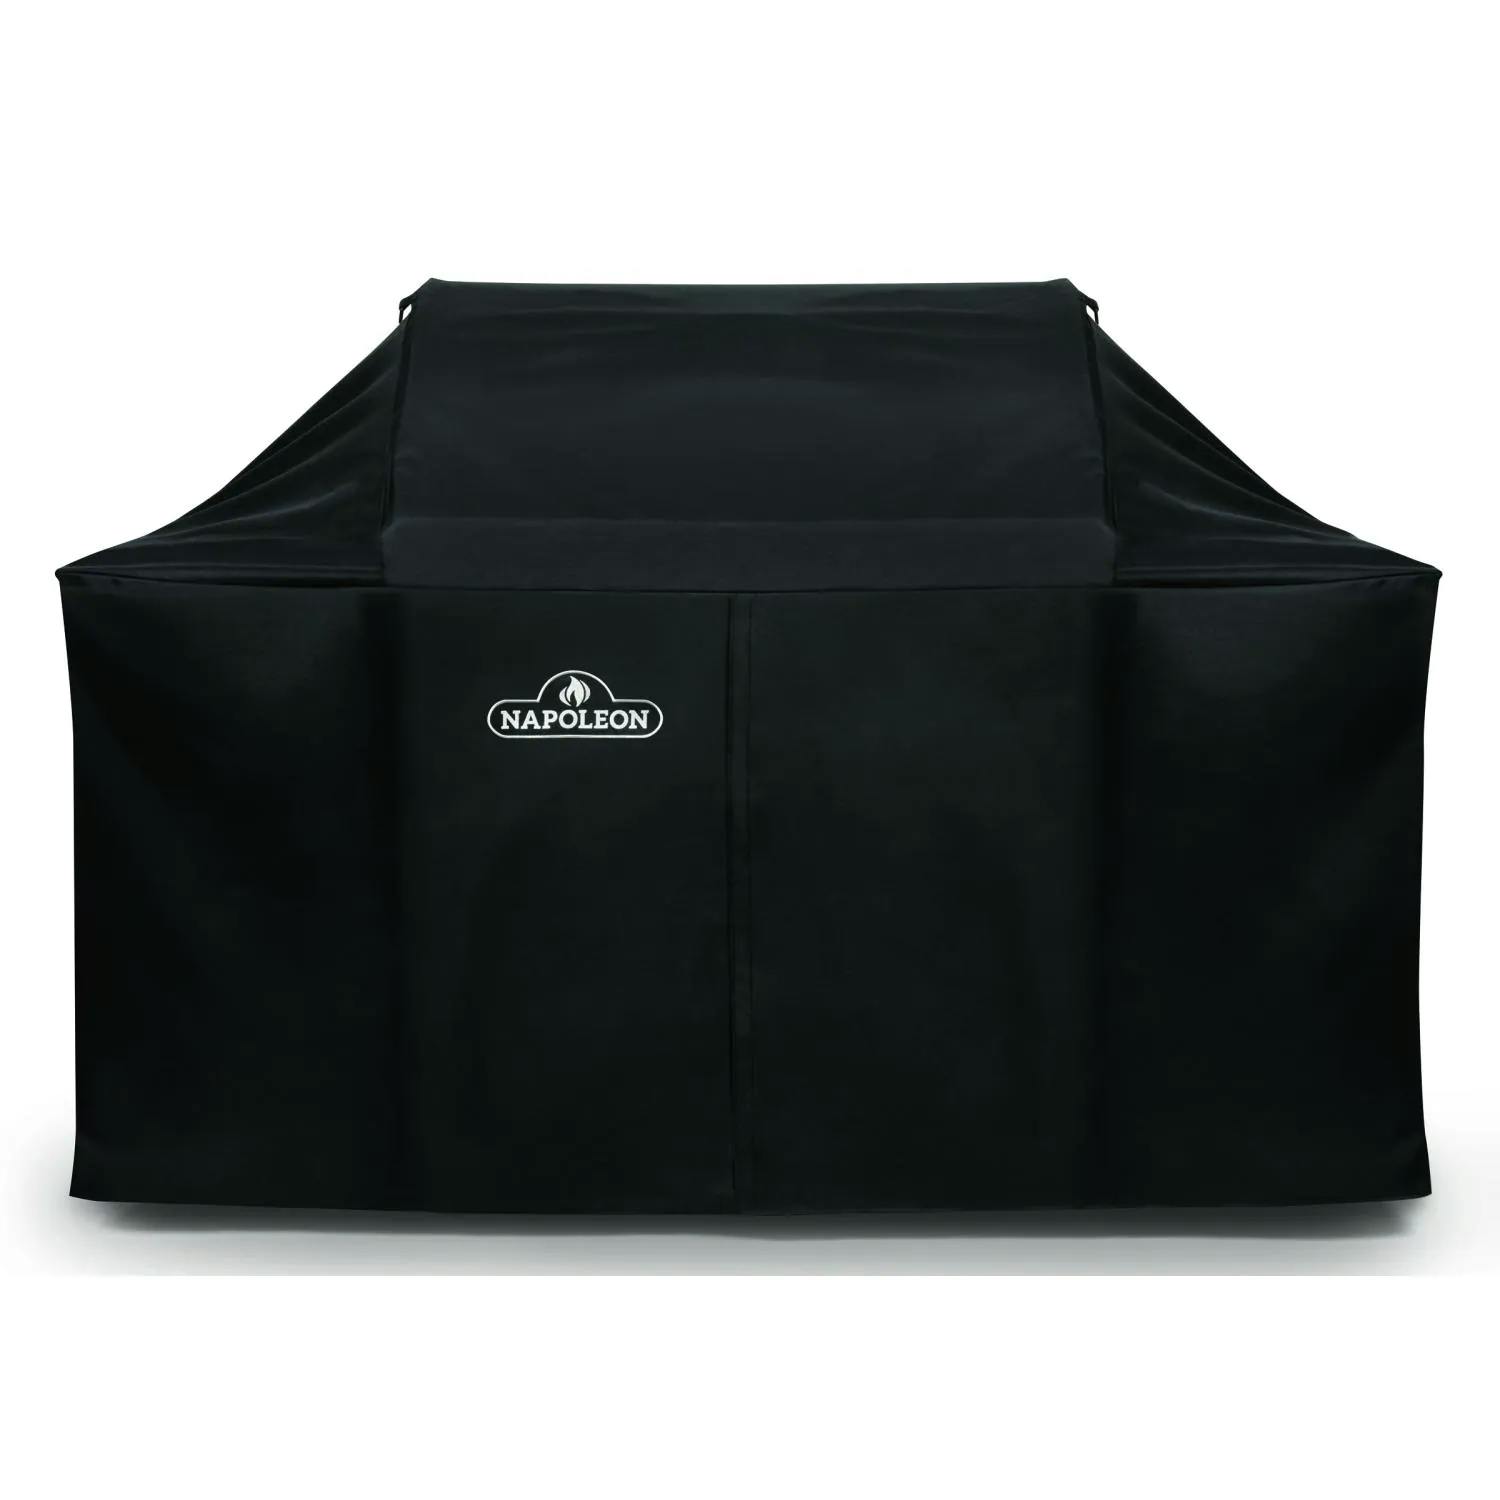 Napoleon Grill Cover For LEX 605 & Charcoal Professional Freestanding Gas Grills · 70 in.